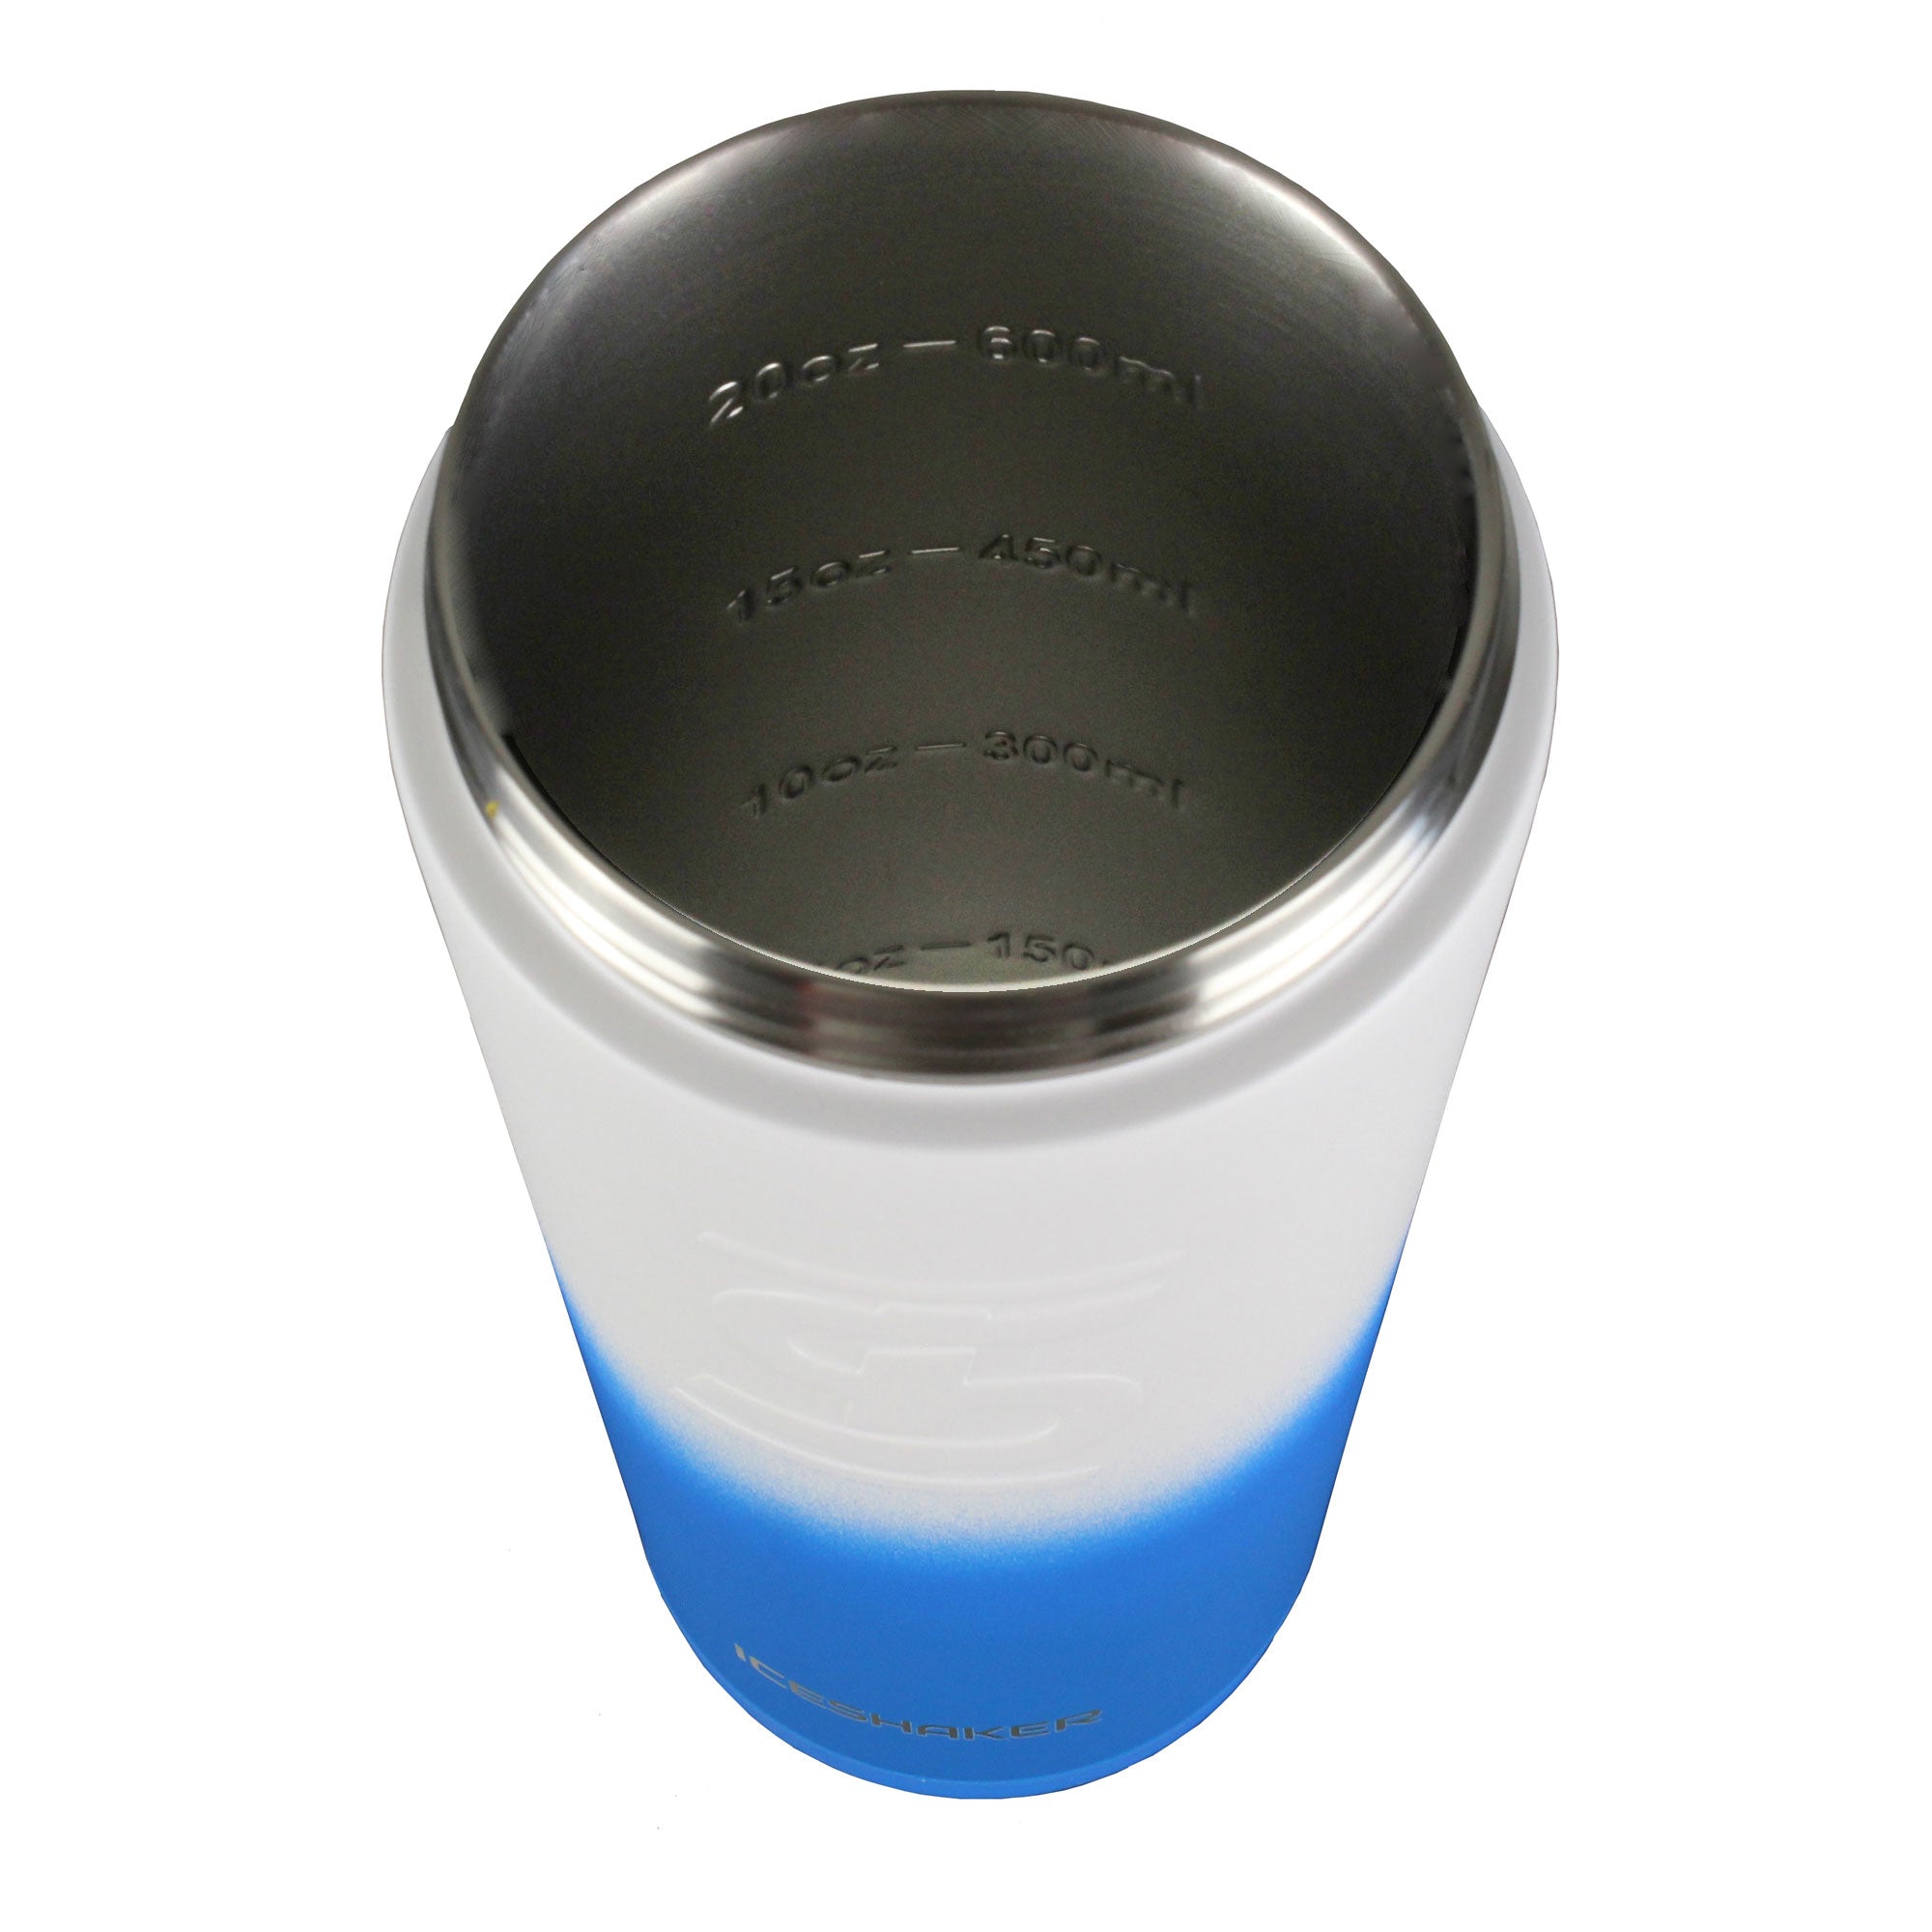 Yeti just launched a new cocktail shaker